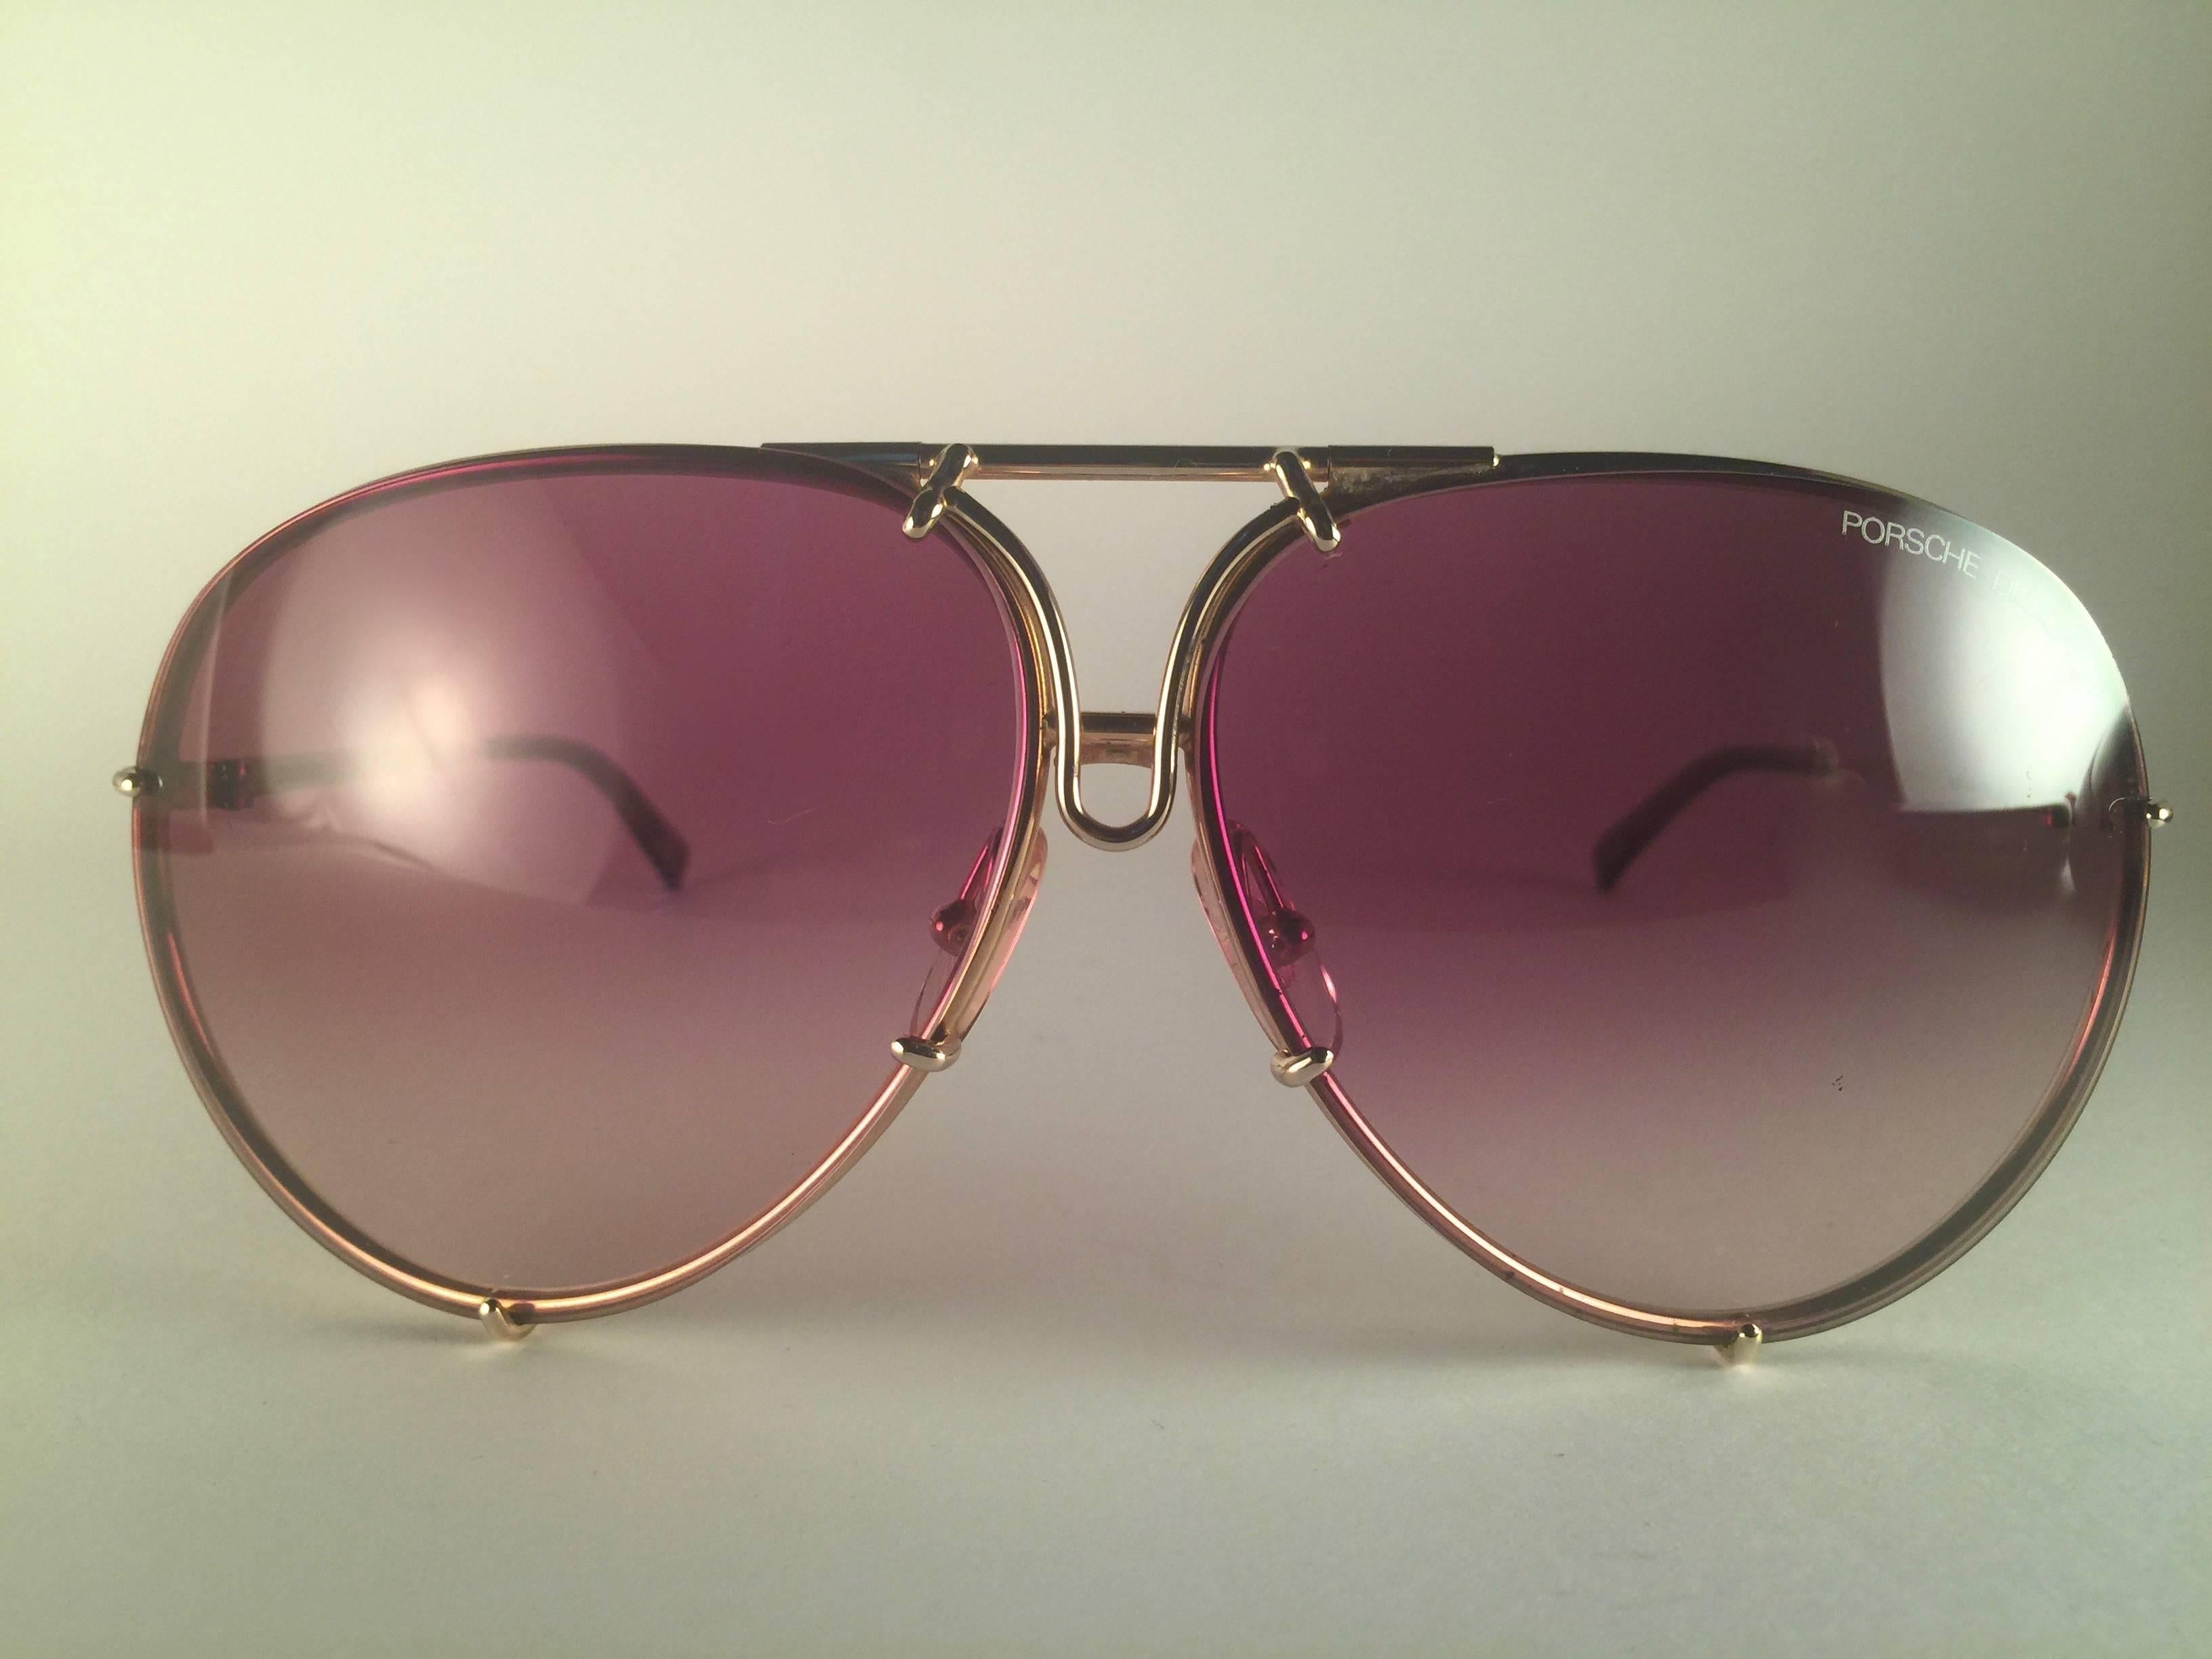 
New 1980's Porsche Design 5623 gold frame with rose gradient lenses. Amazing craftsmanship and quality. 
Comes with the original black Porsche hard case thats has some wear on it due to nearly 40 years of storage. There is no extra set of lenses